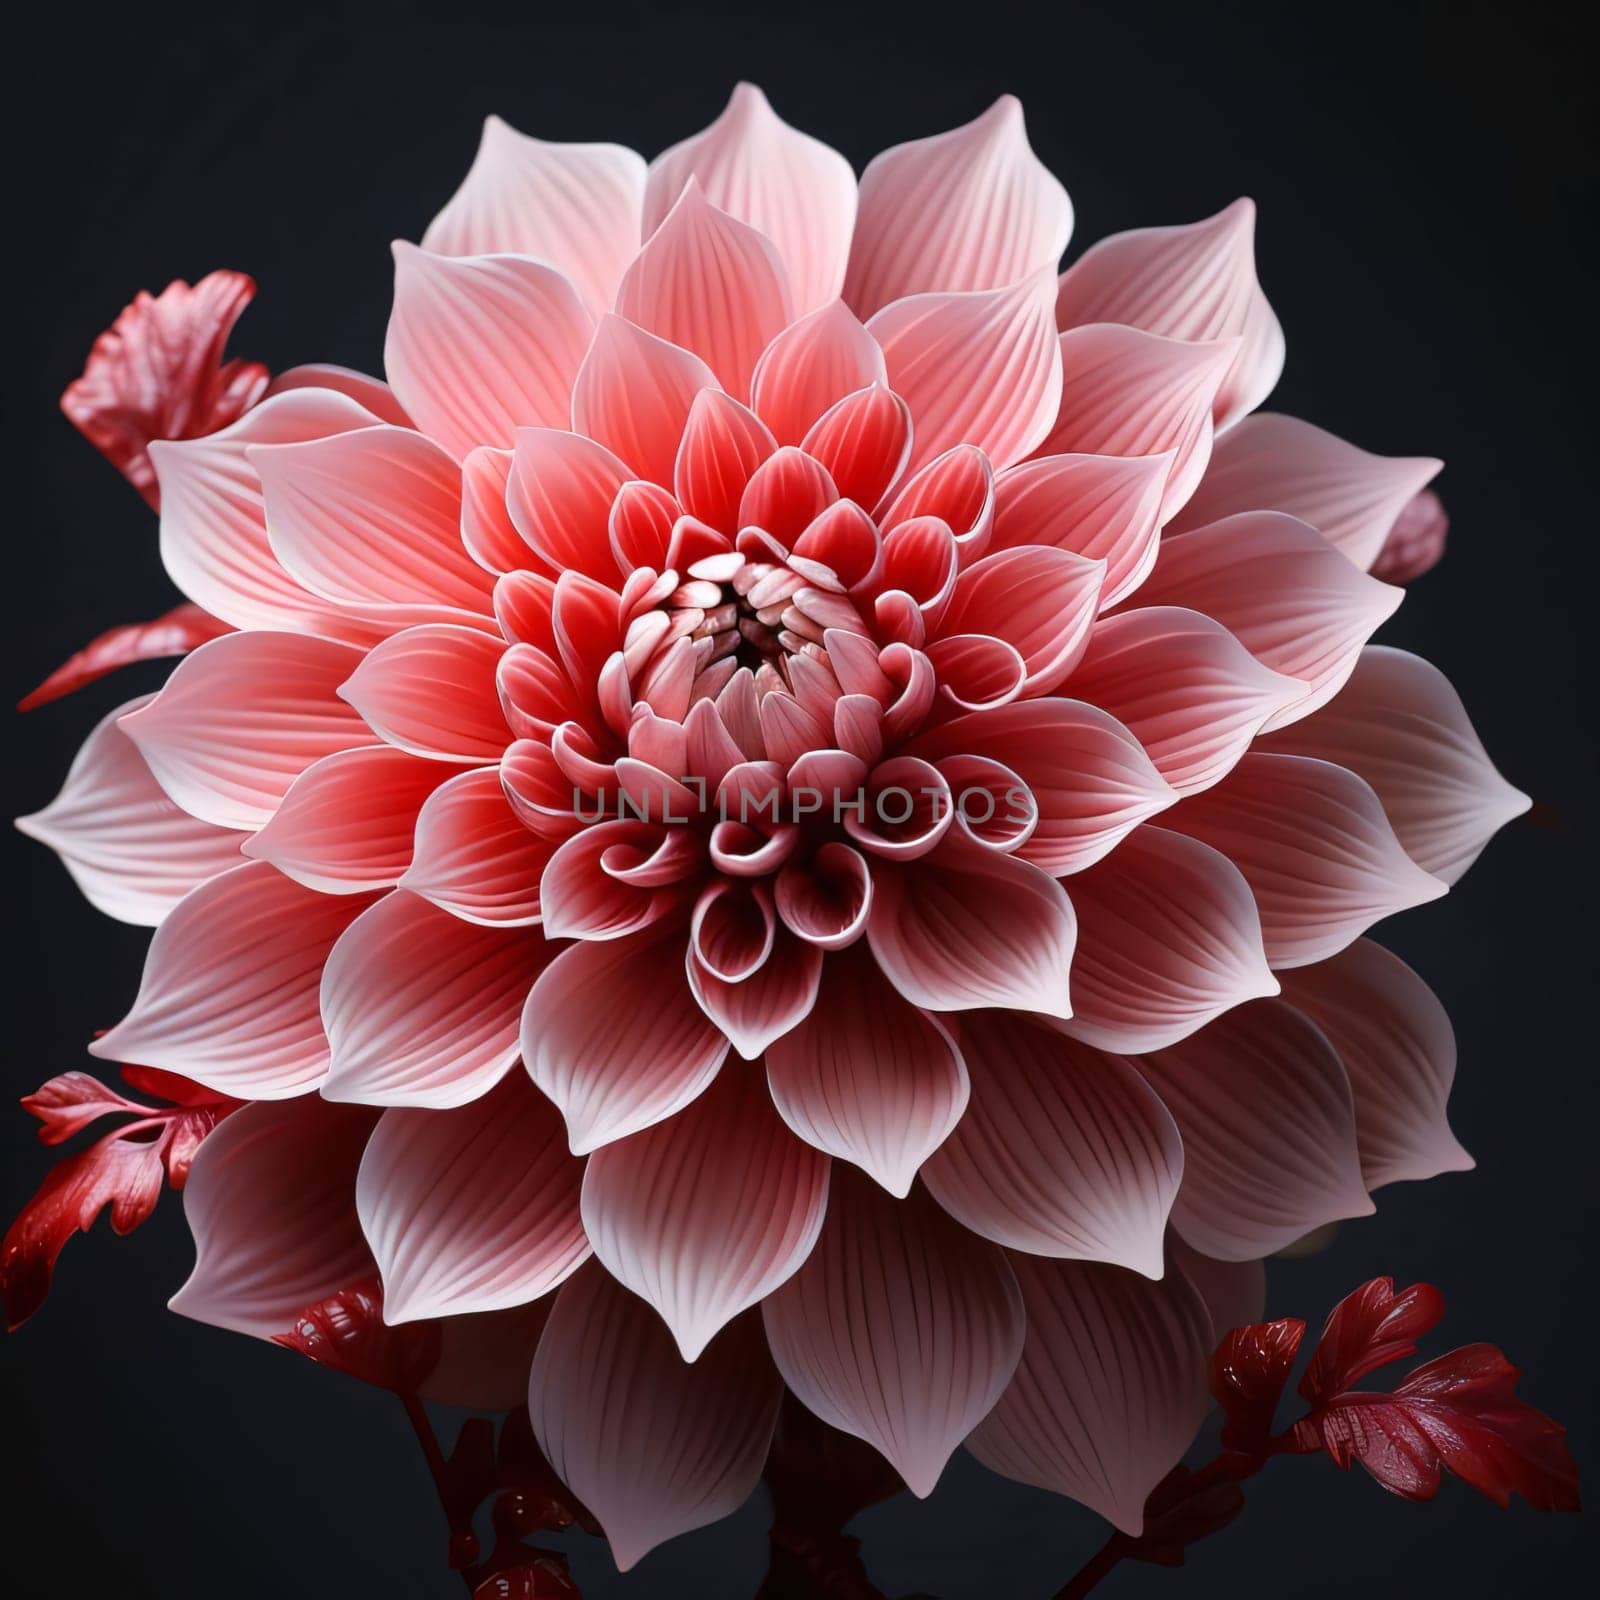 Pink and white dahlia on black background. Flowering flowers, a symbol of spring, new life. by ThemesS